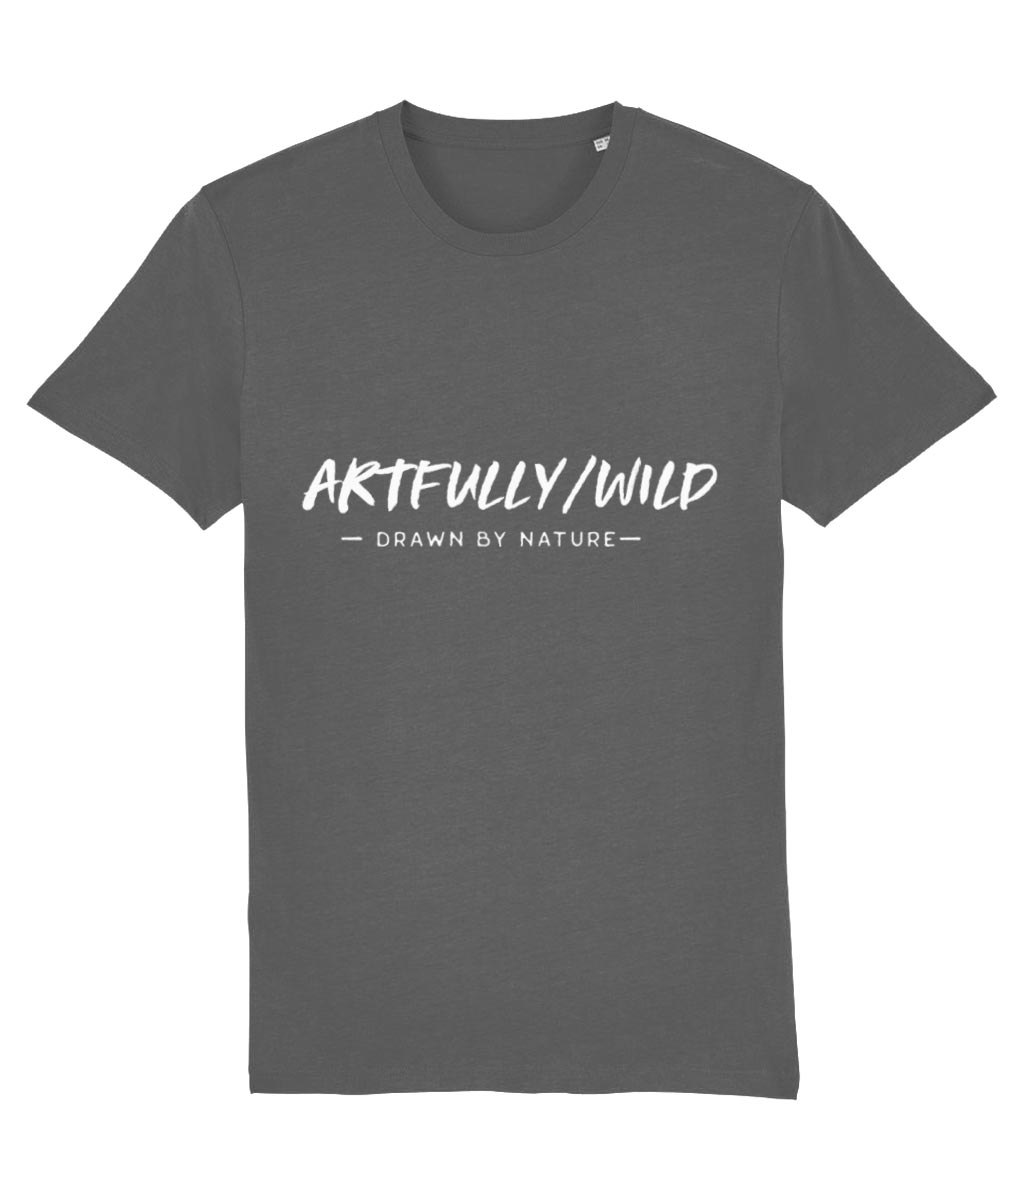 'ARTFULLY WILD. DRAWN BY NATURE' Printed Organic Cotton Dark Grey T-Shirt. Unisex/Men/Women. Printed with eco-friendly water-based Inks. Sustainable Clothing by Artfully/Wild.